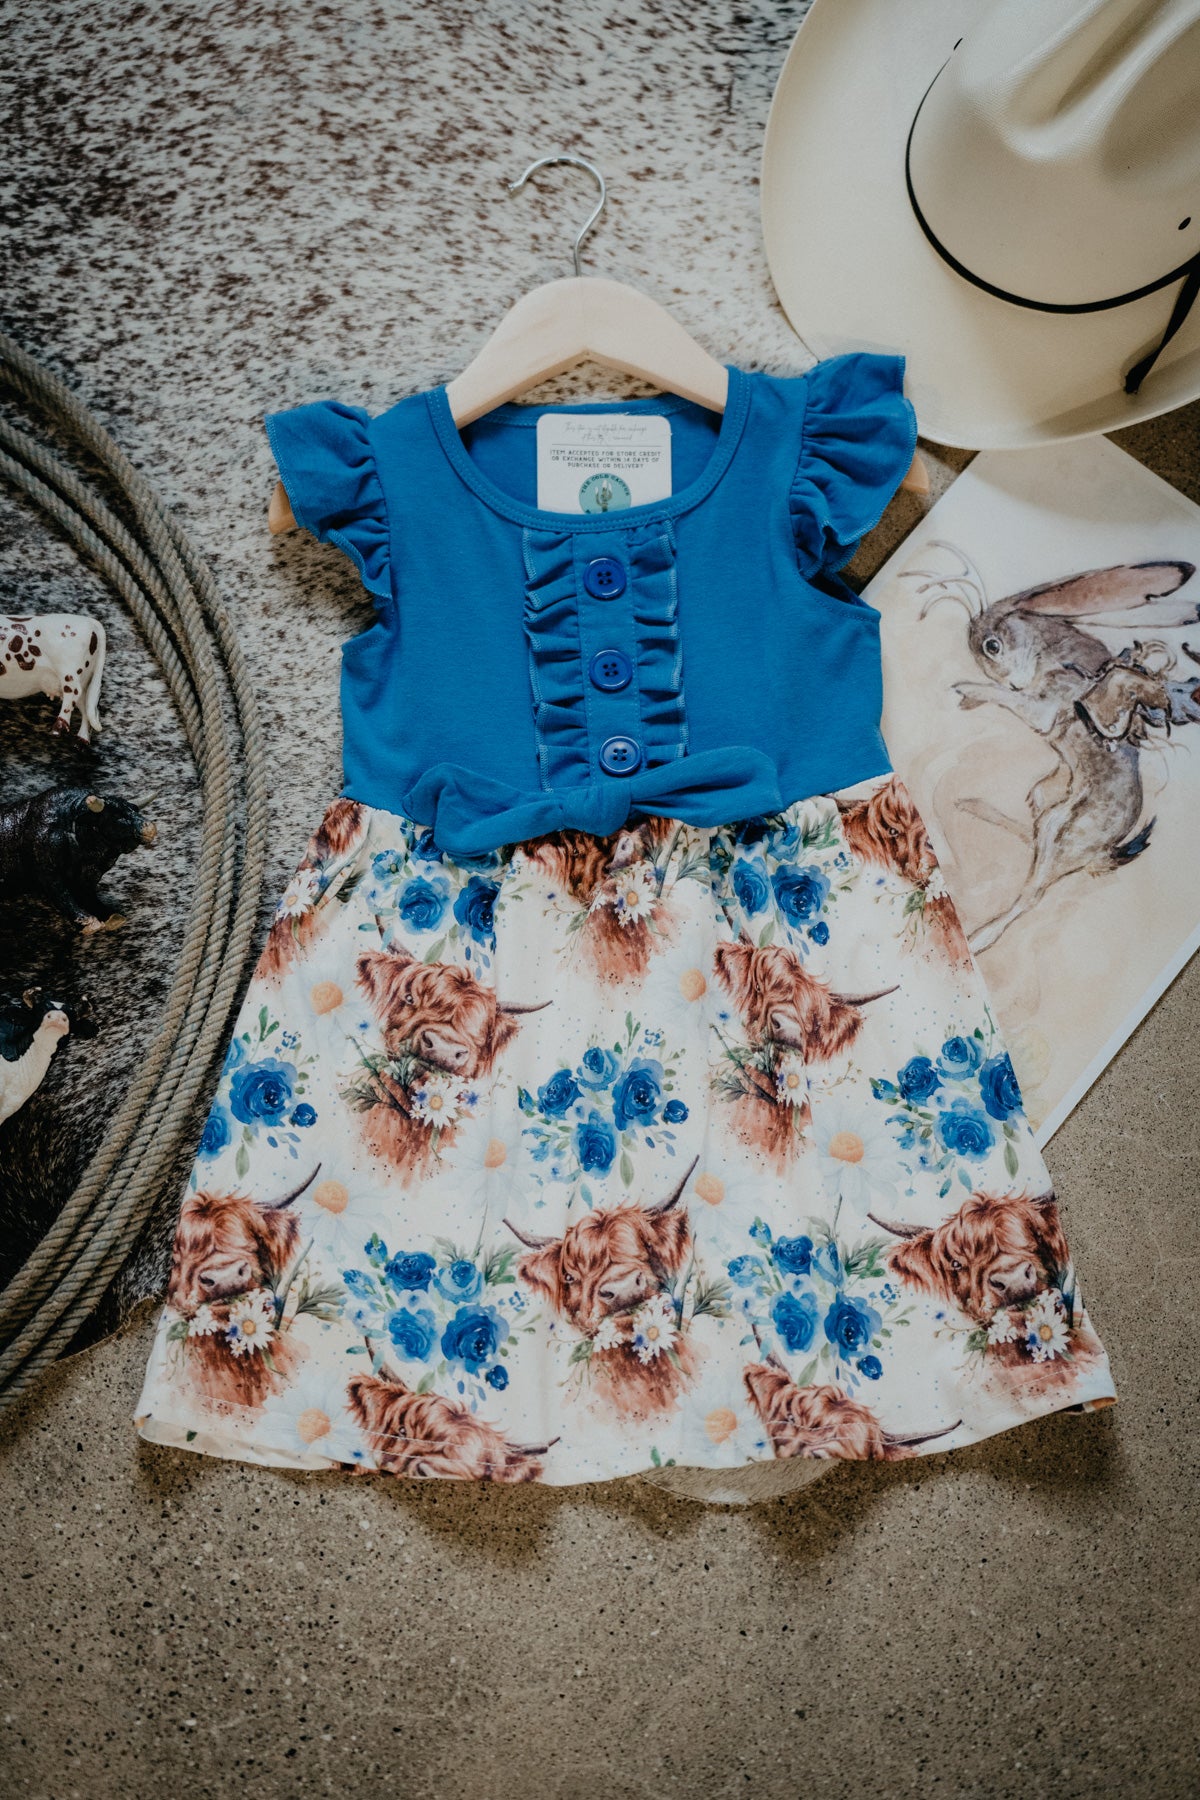 Blue and Highland Print Dress (12-18M to 8/9T)